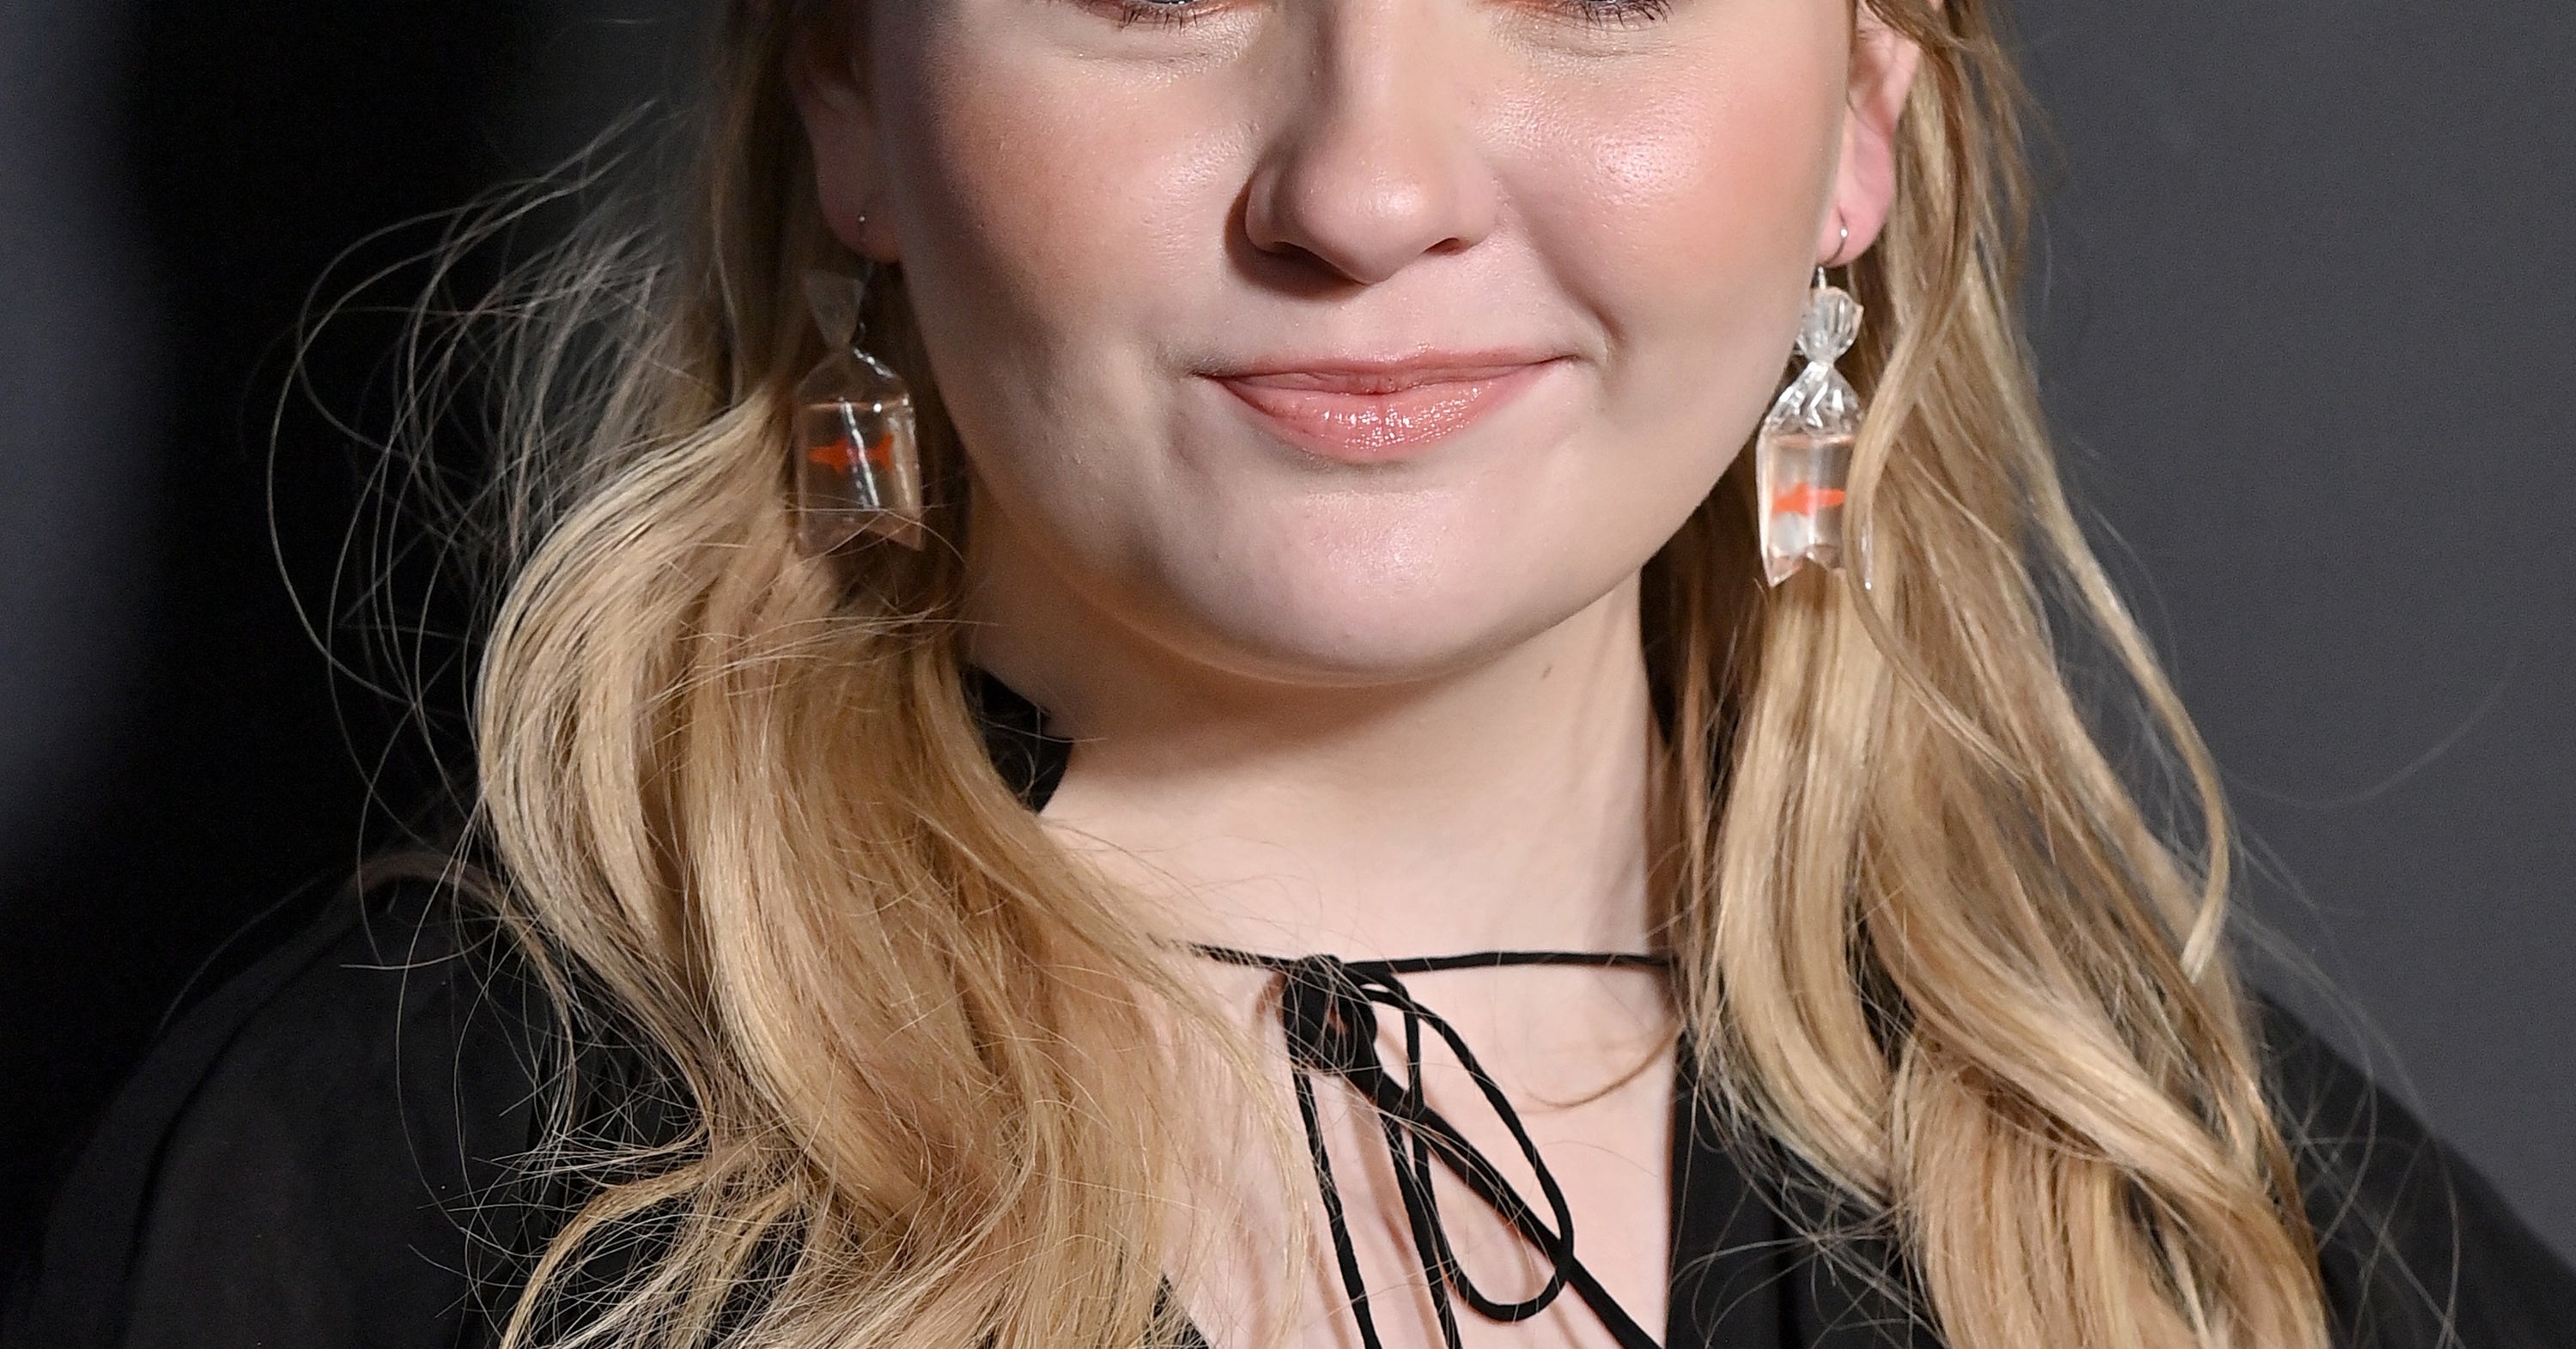 Abigail Breslin Was In An Abusive Relationship